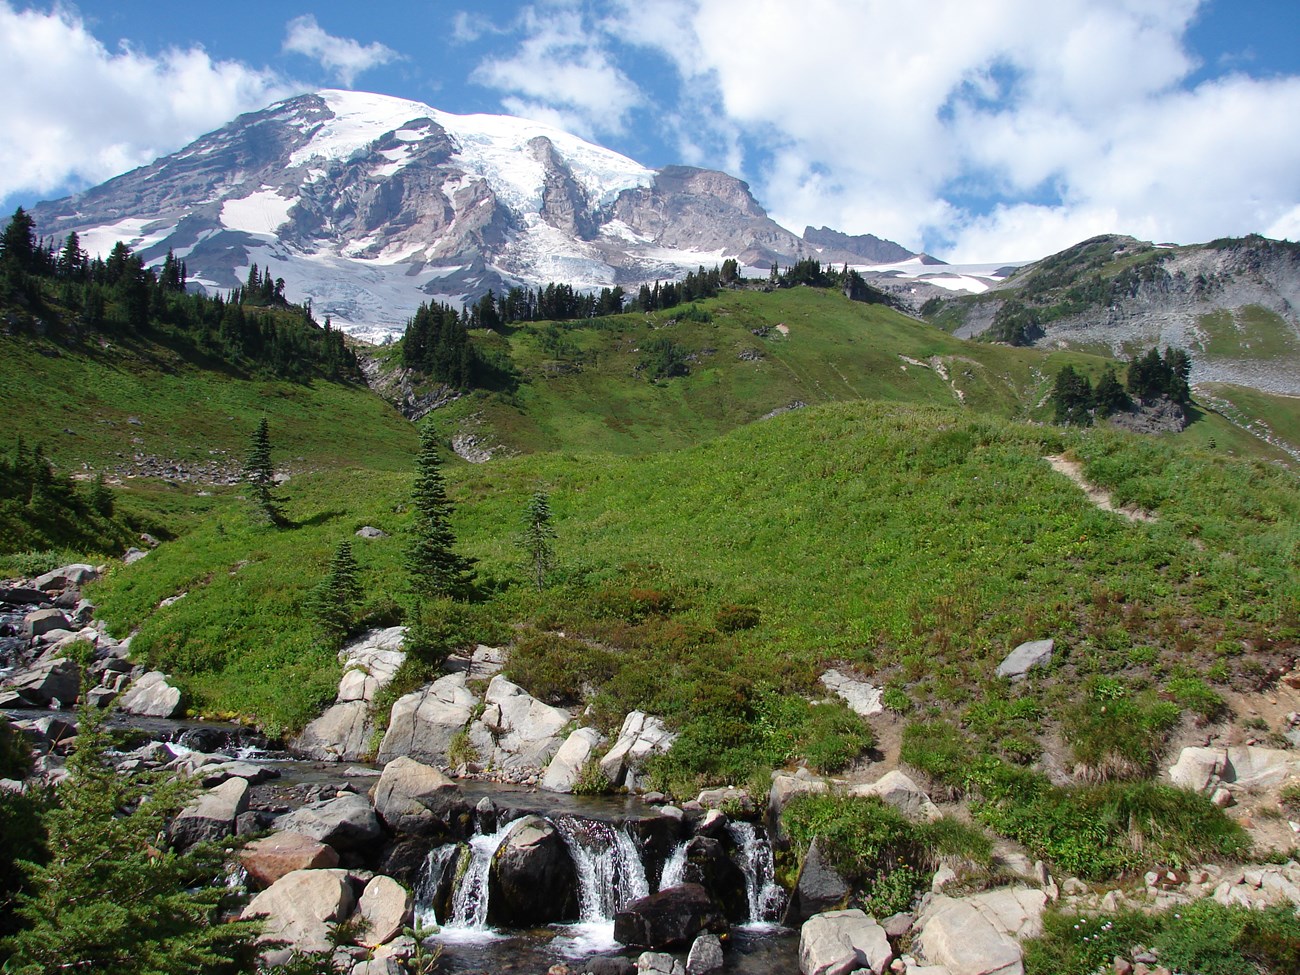 A cascading waterfall flows through the foreground. A lush green hillside and Mount Rainier fill the background.